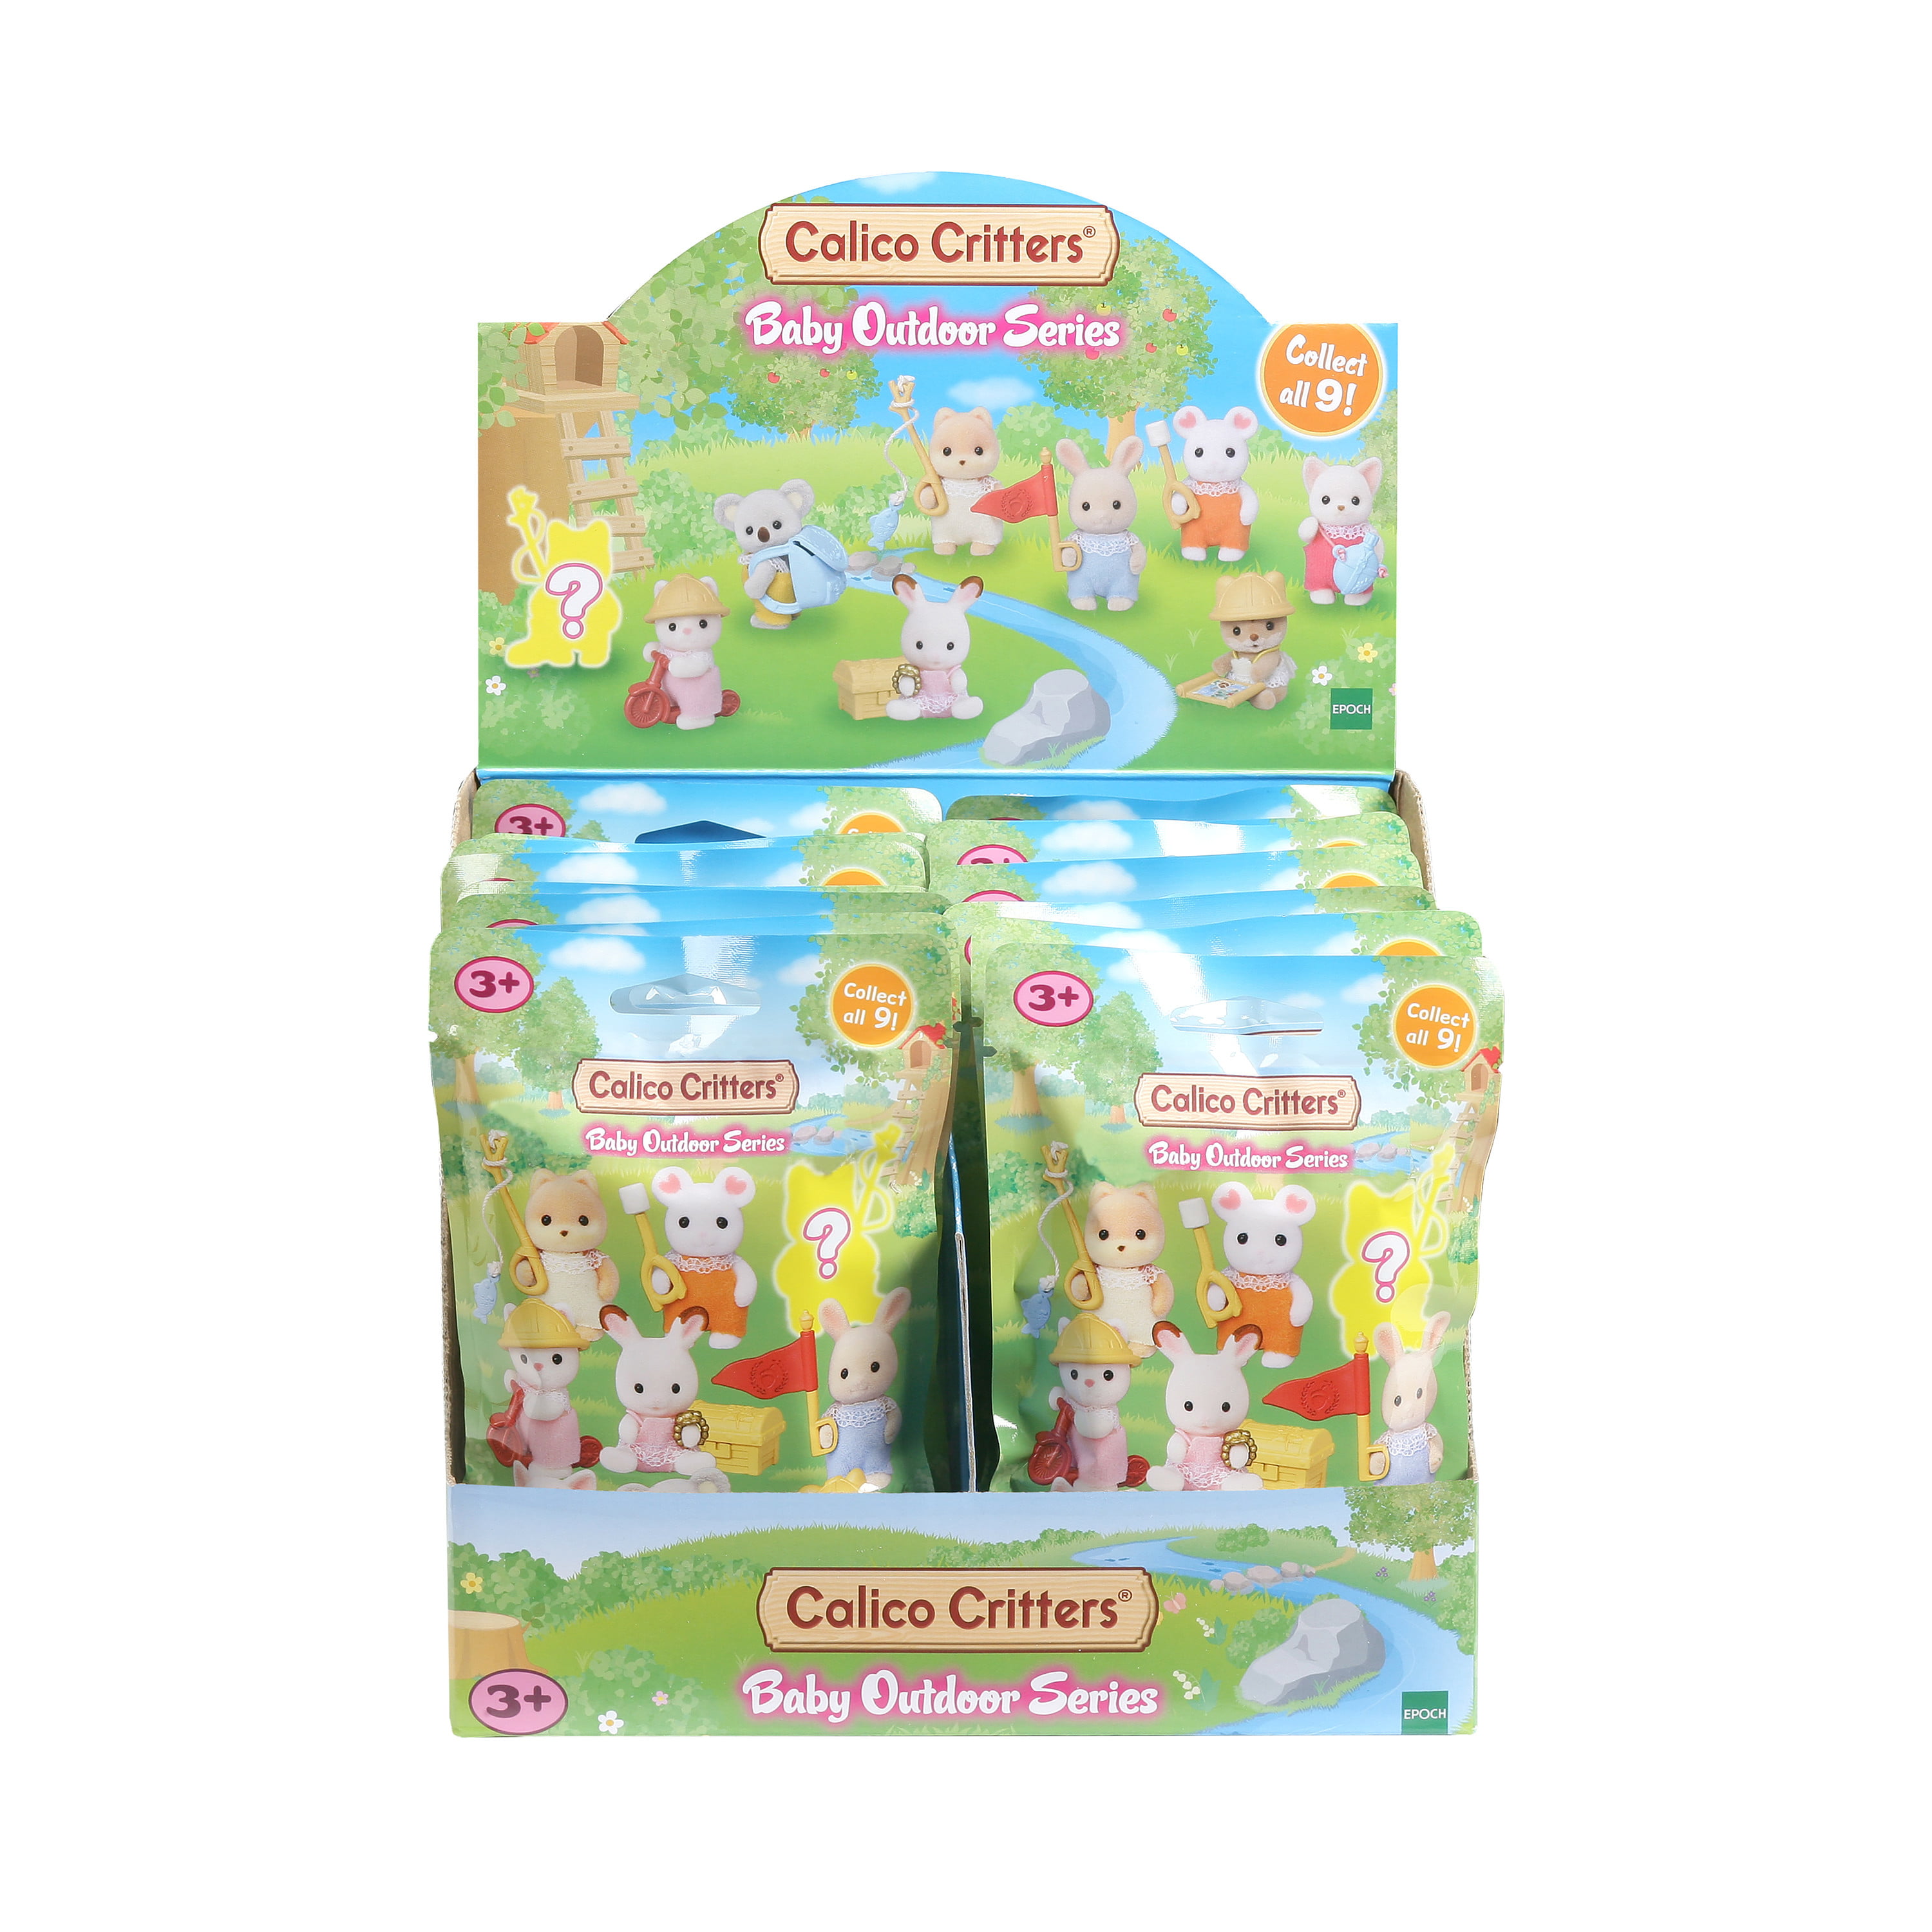 Calico Critters Blind Bags - Baby Treats Series – Skeeter's Toybox